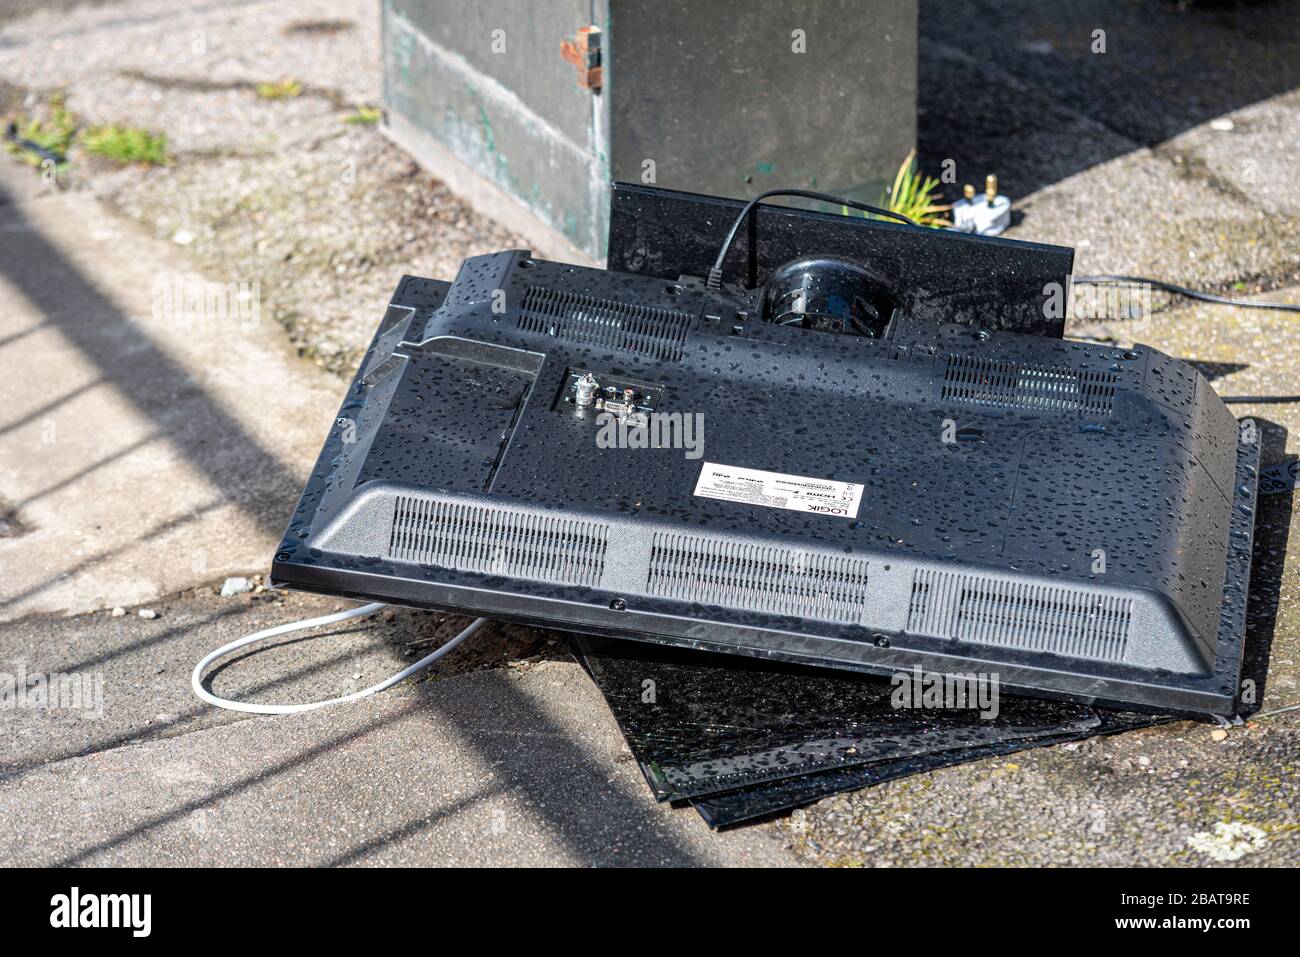 Discarded flat screen television smashed on a street pavement. Electrical waste dumped outside in the rain. Logik TV with plug attached Stock Photo